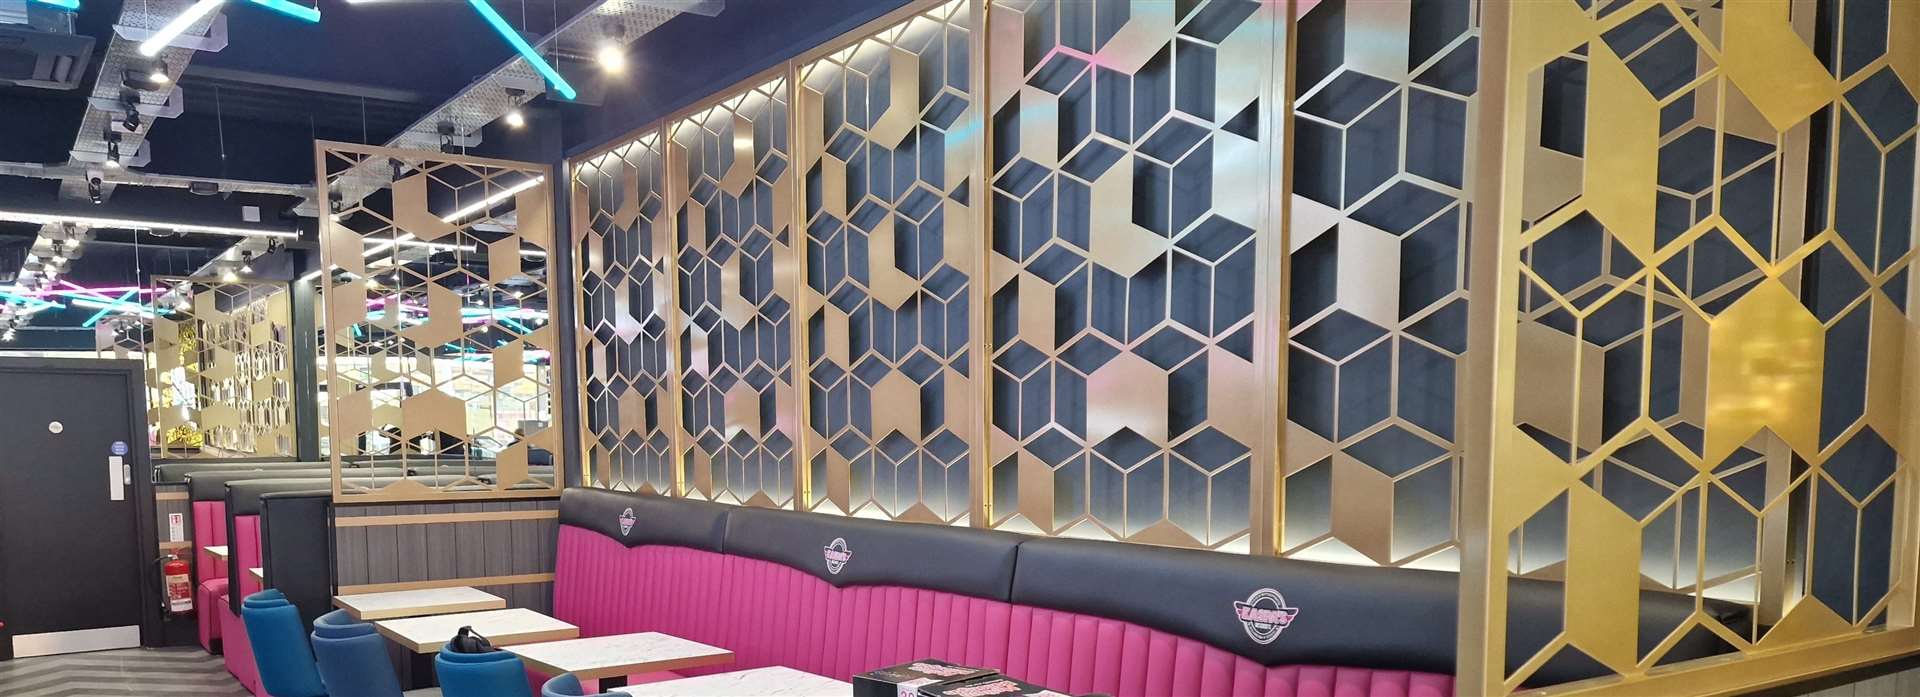 The new venue features modern decorations. Picture: Kaspa's Desserts